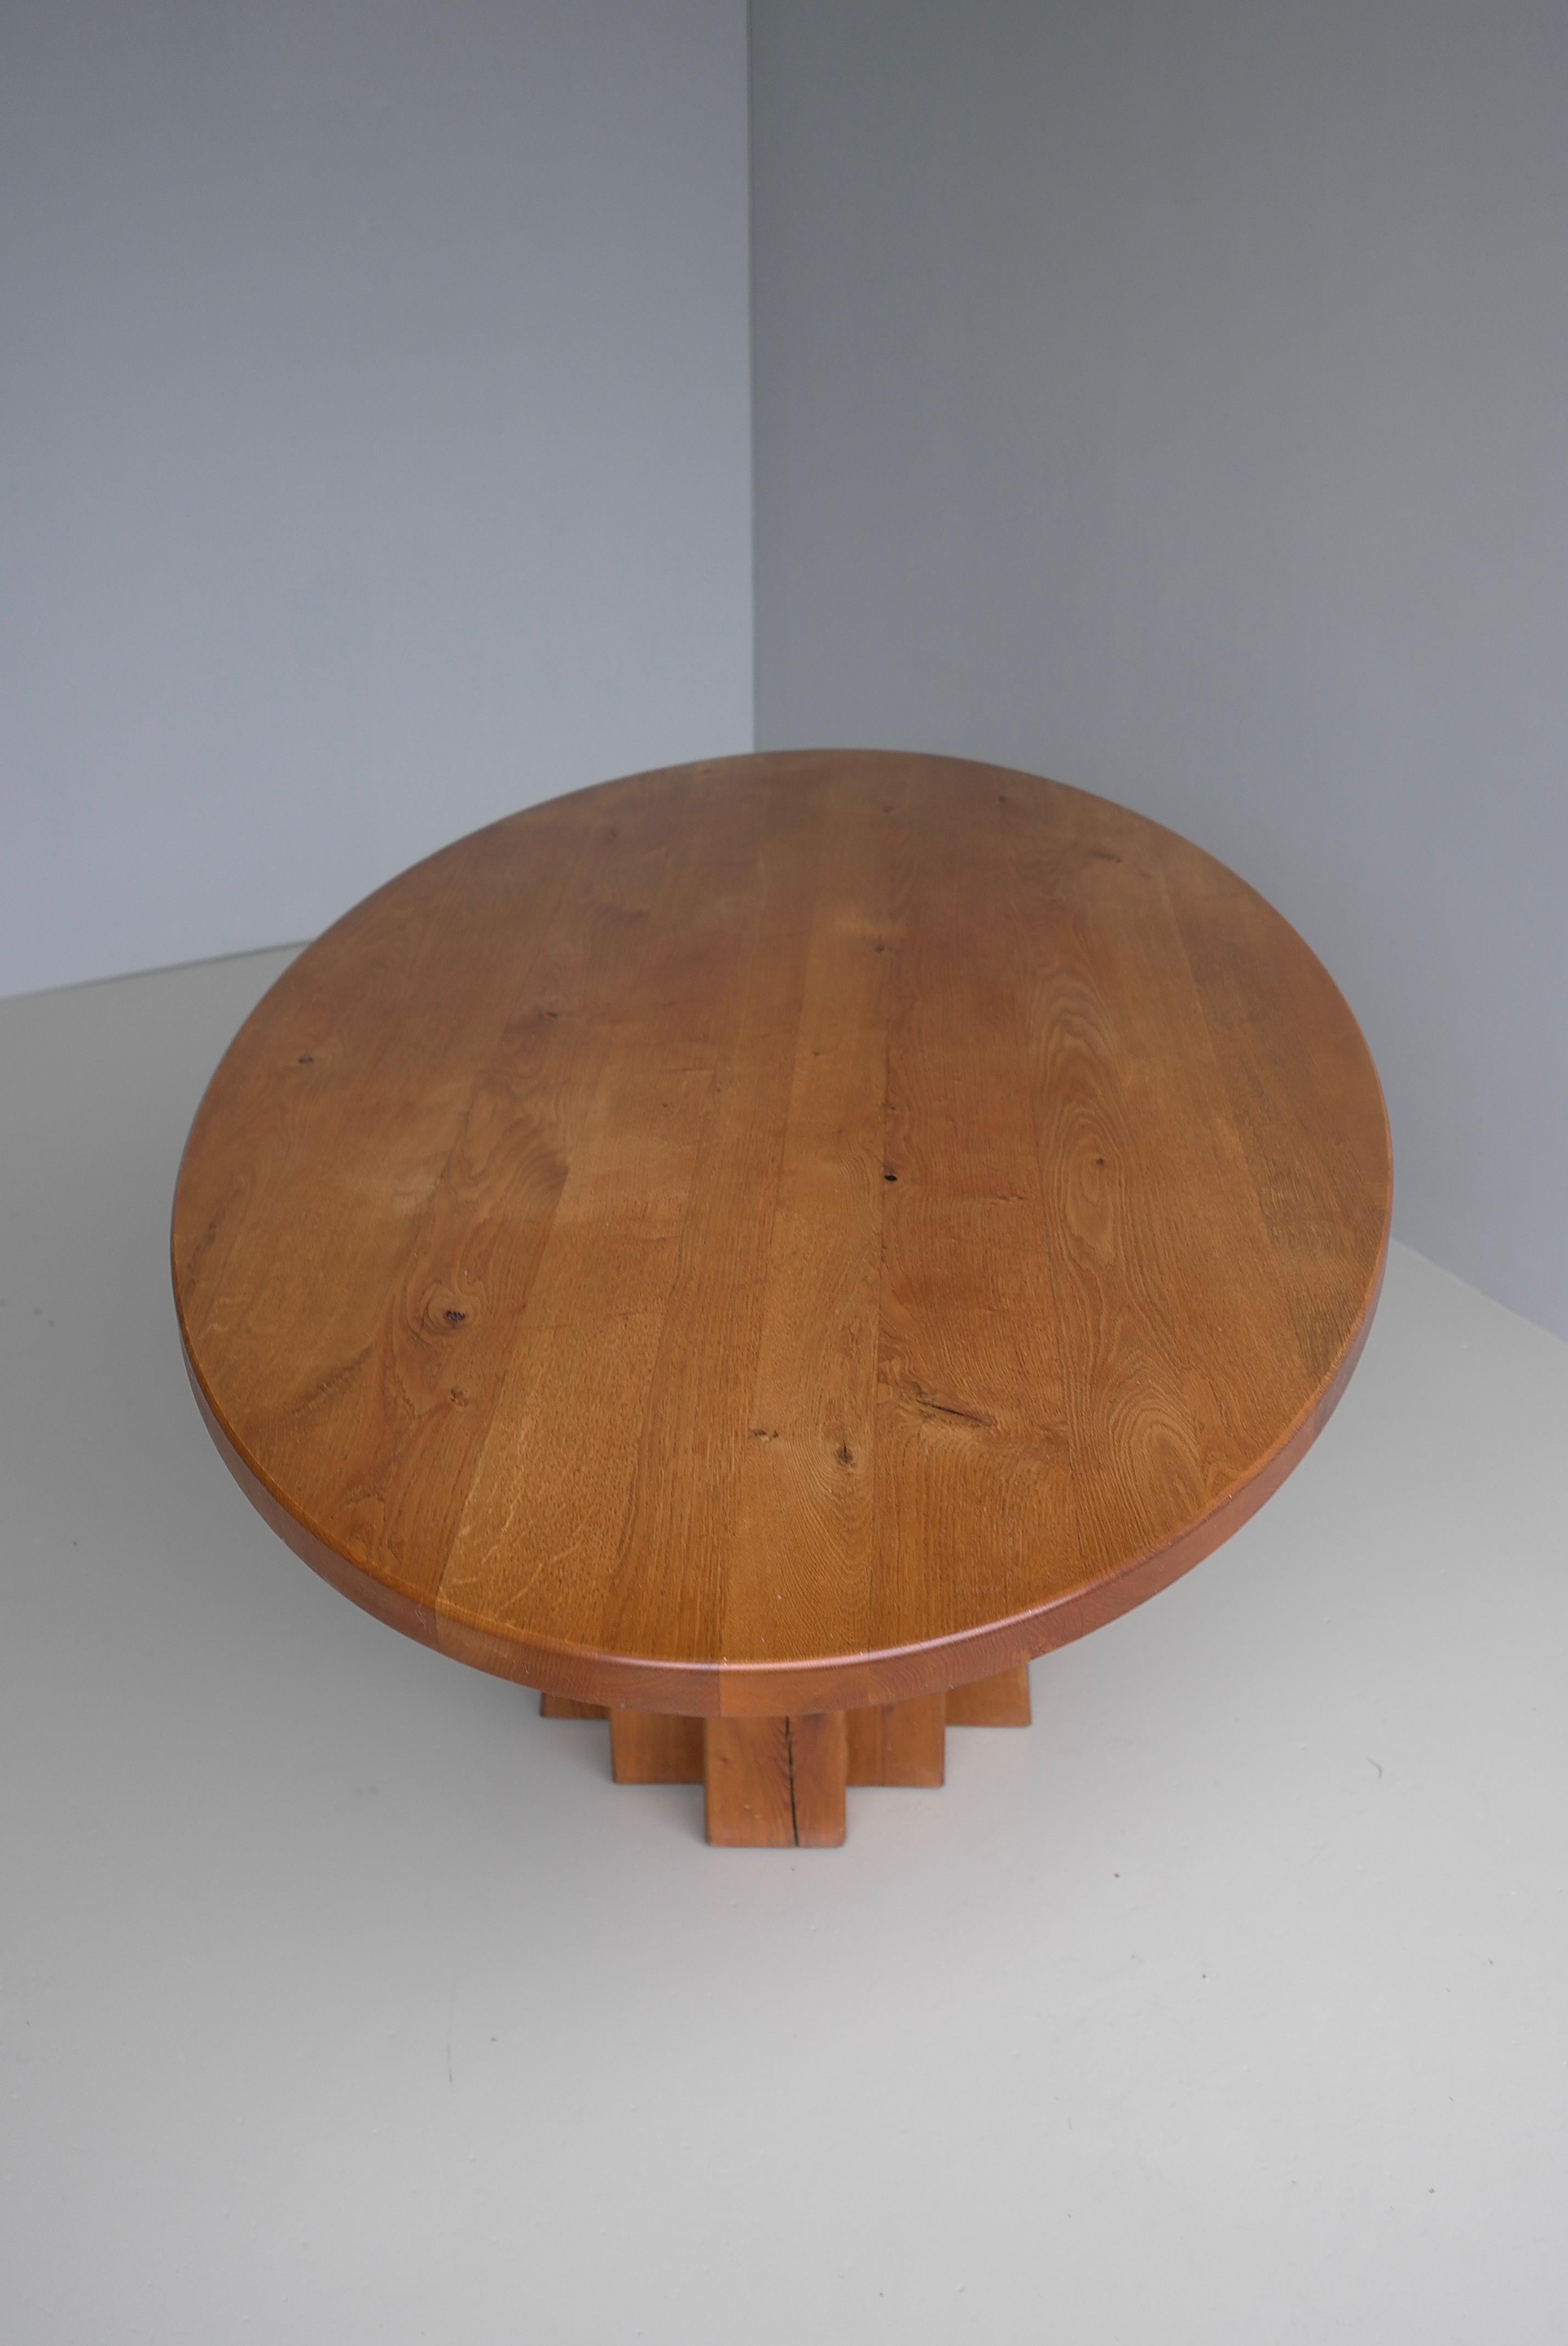 20th Century Large Oval Solid Oak Dining Table in style of Pierre Chapo, France circa 1970 For Sale